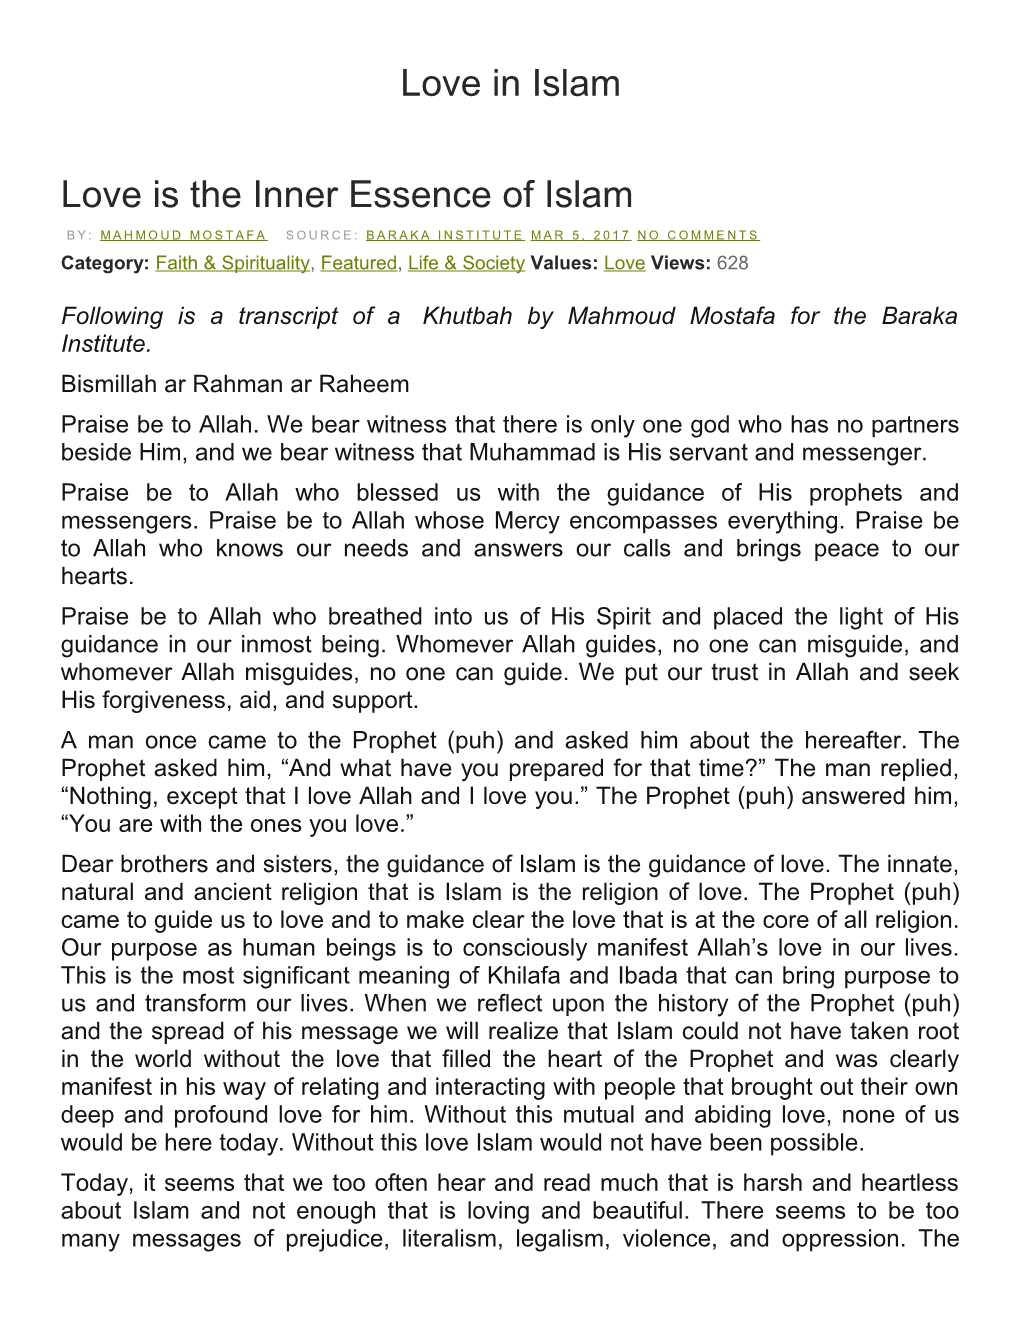 Love Is the Inner Essence of Islam